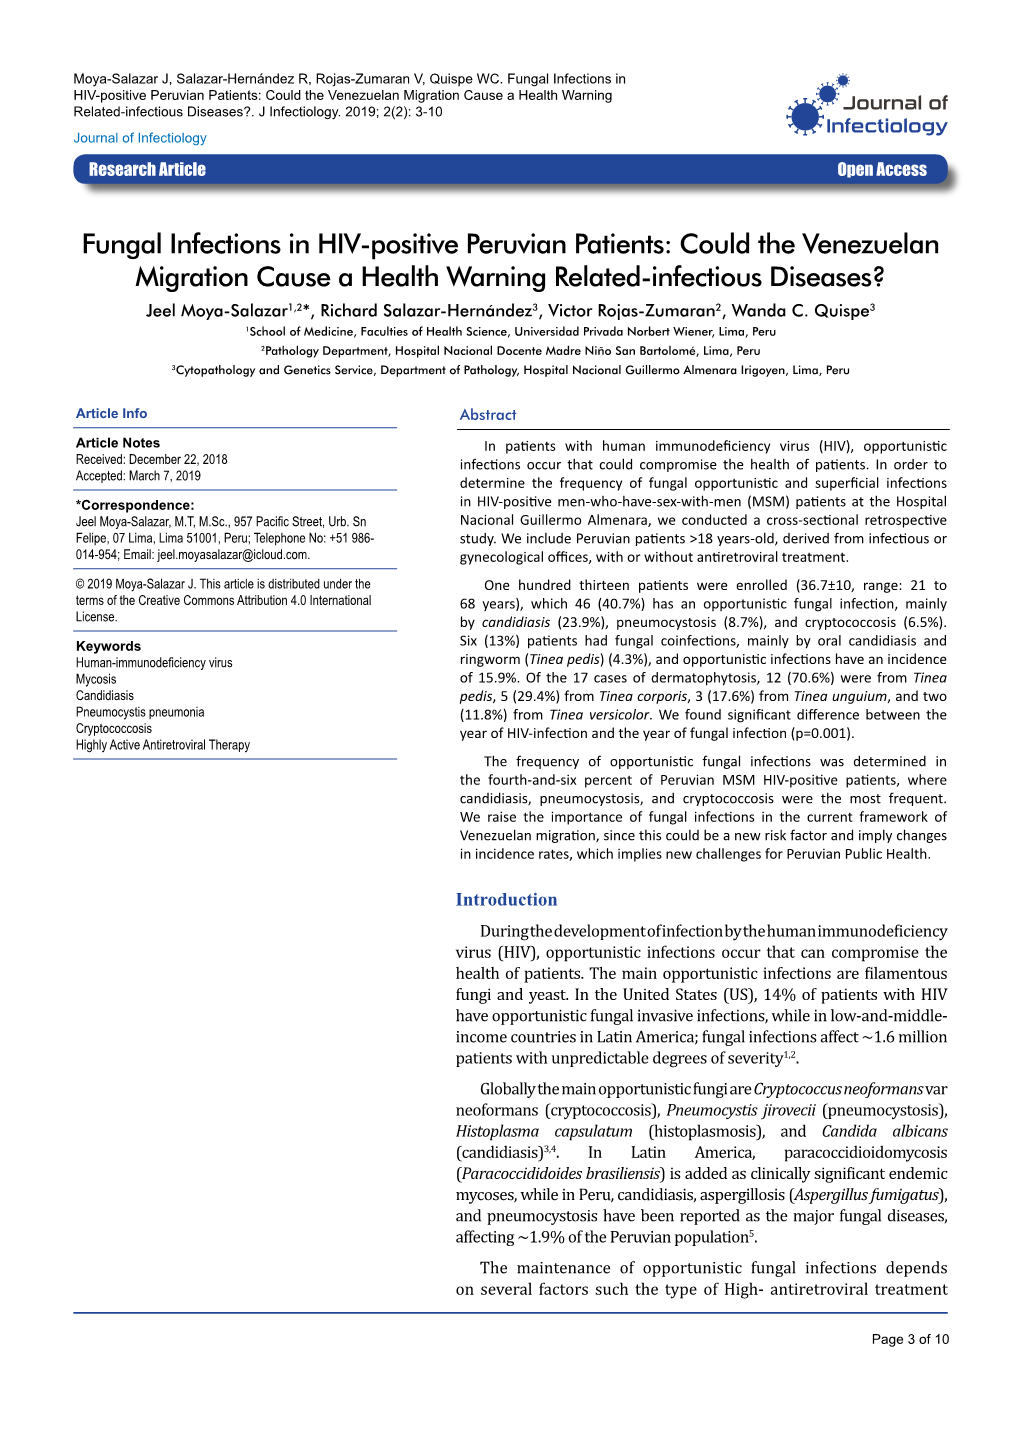 Fungal Infections in HIV-Positive Peruvian Patients: Could the Venezuelan Migration Cause a Health Warning Related-Infectious Diseases?